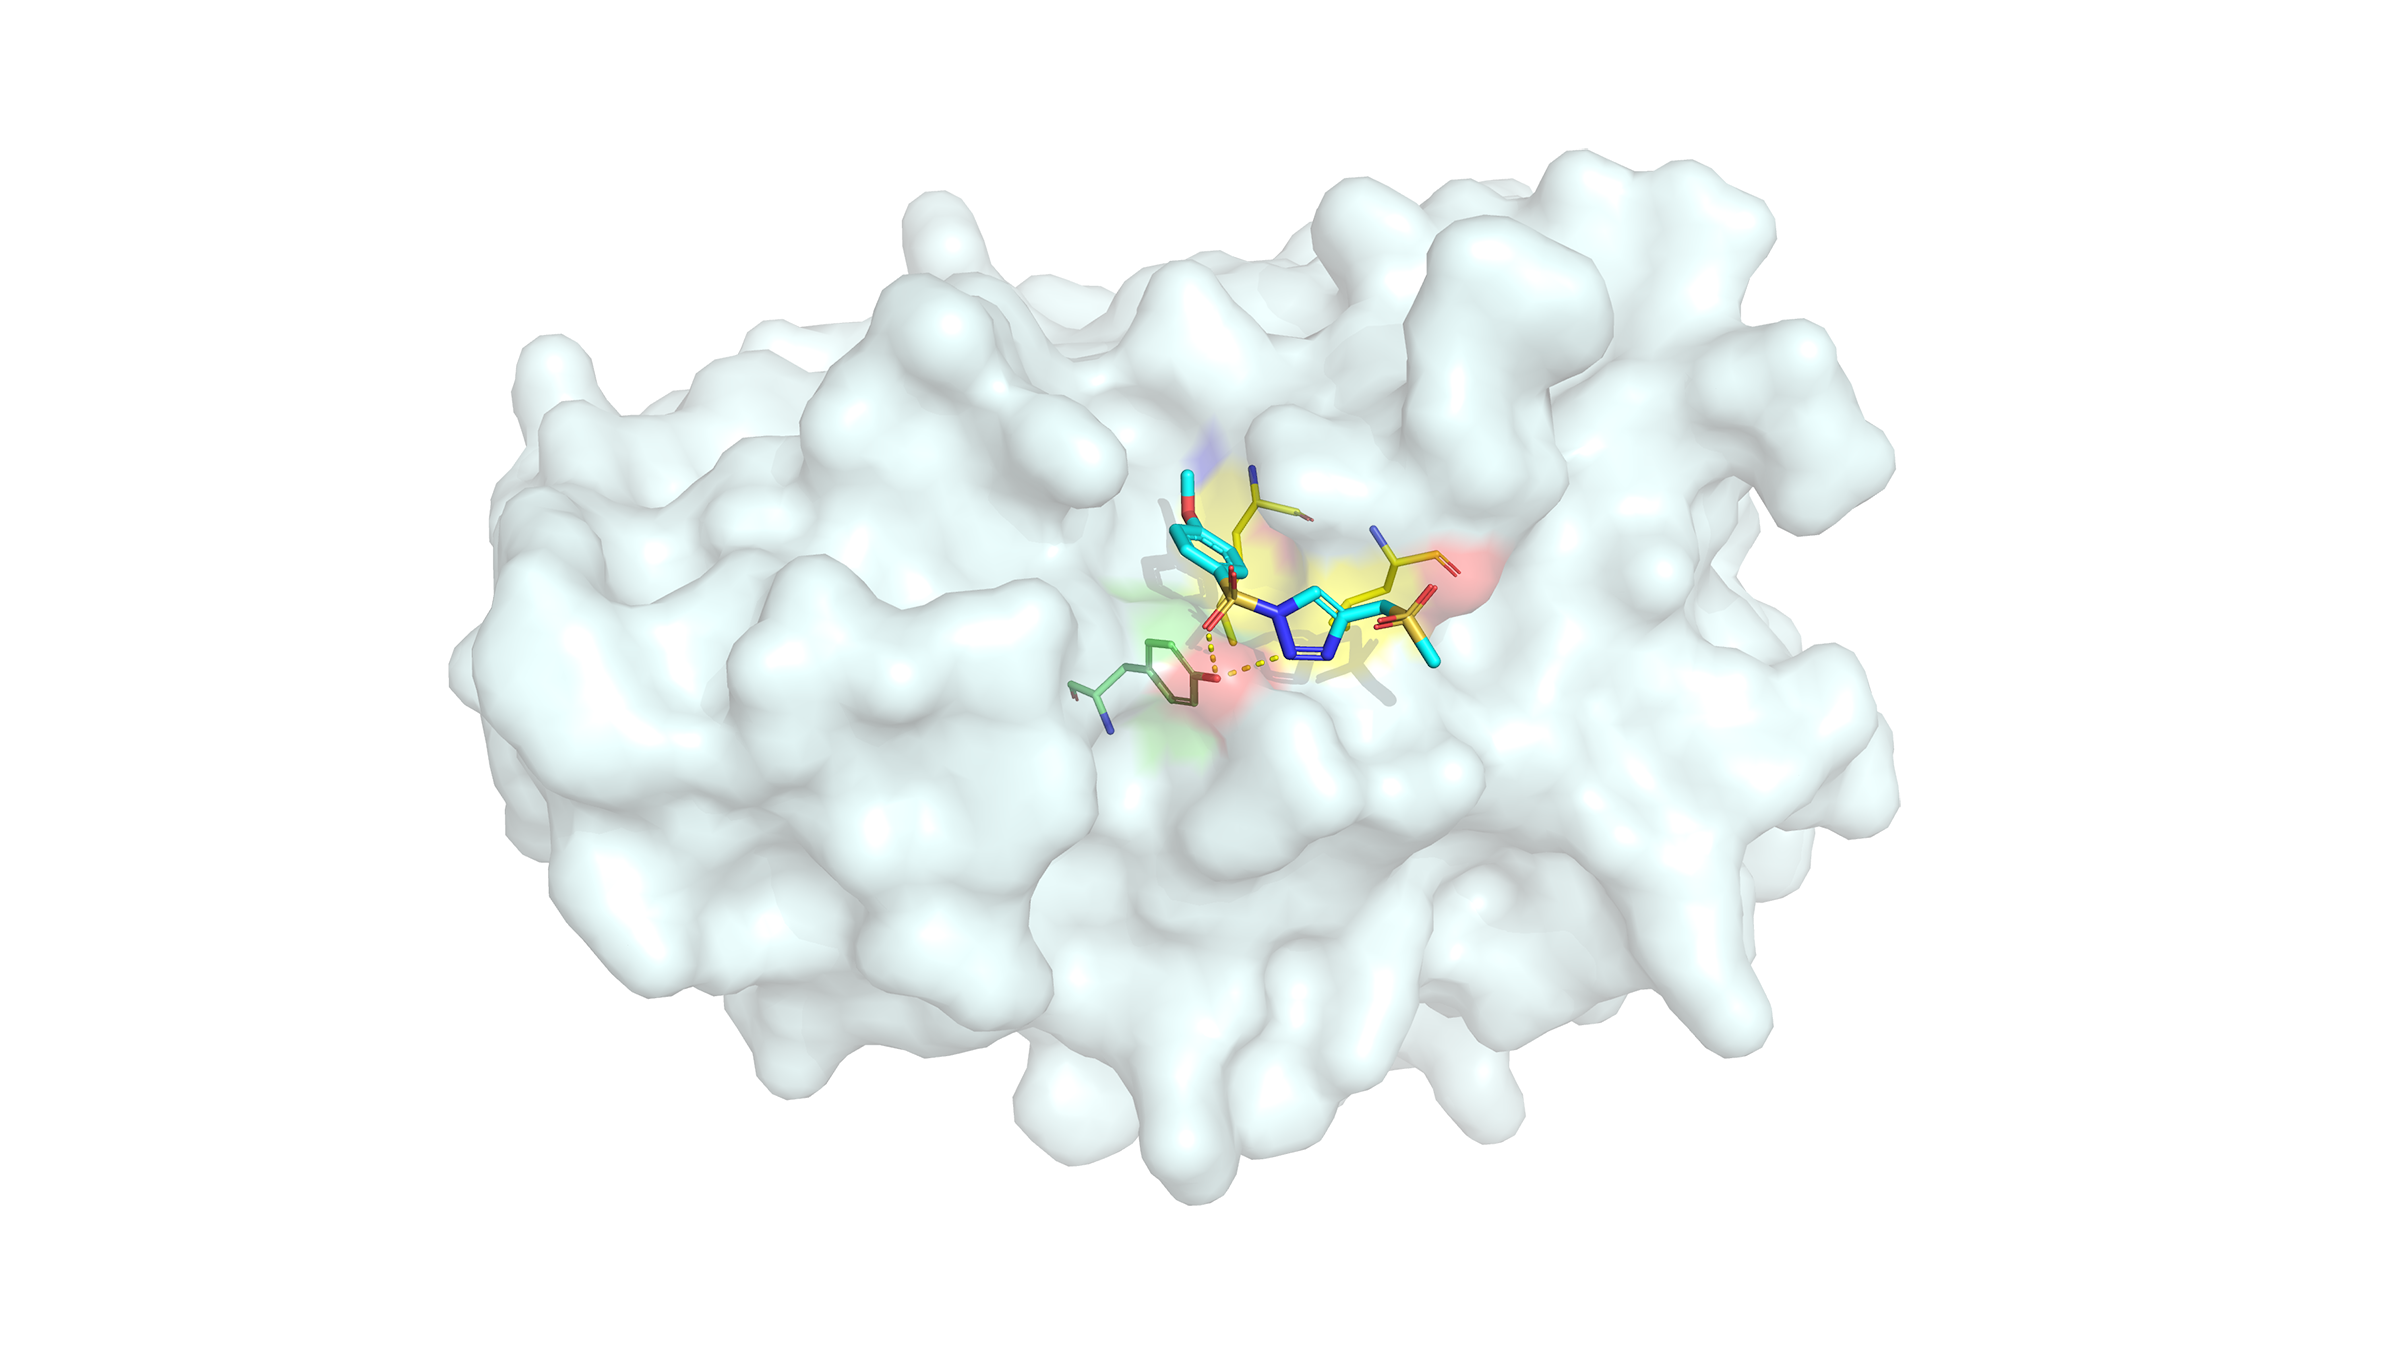 Using SuTex, short for sulfur-triazole exchange chemistry, Ken Hsu has created an approach to target sites on proteins that have extra electrons to share. This covalent bond is very stable compared with bonds formed by traditional drugs. Credit: Zhihong Li